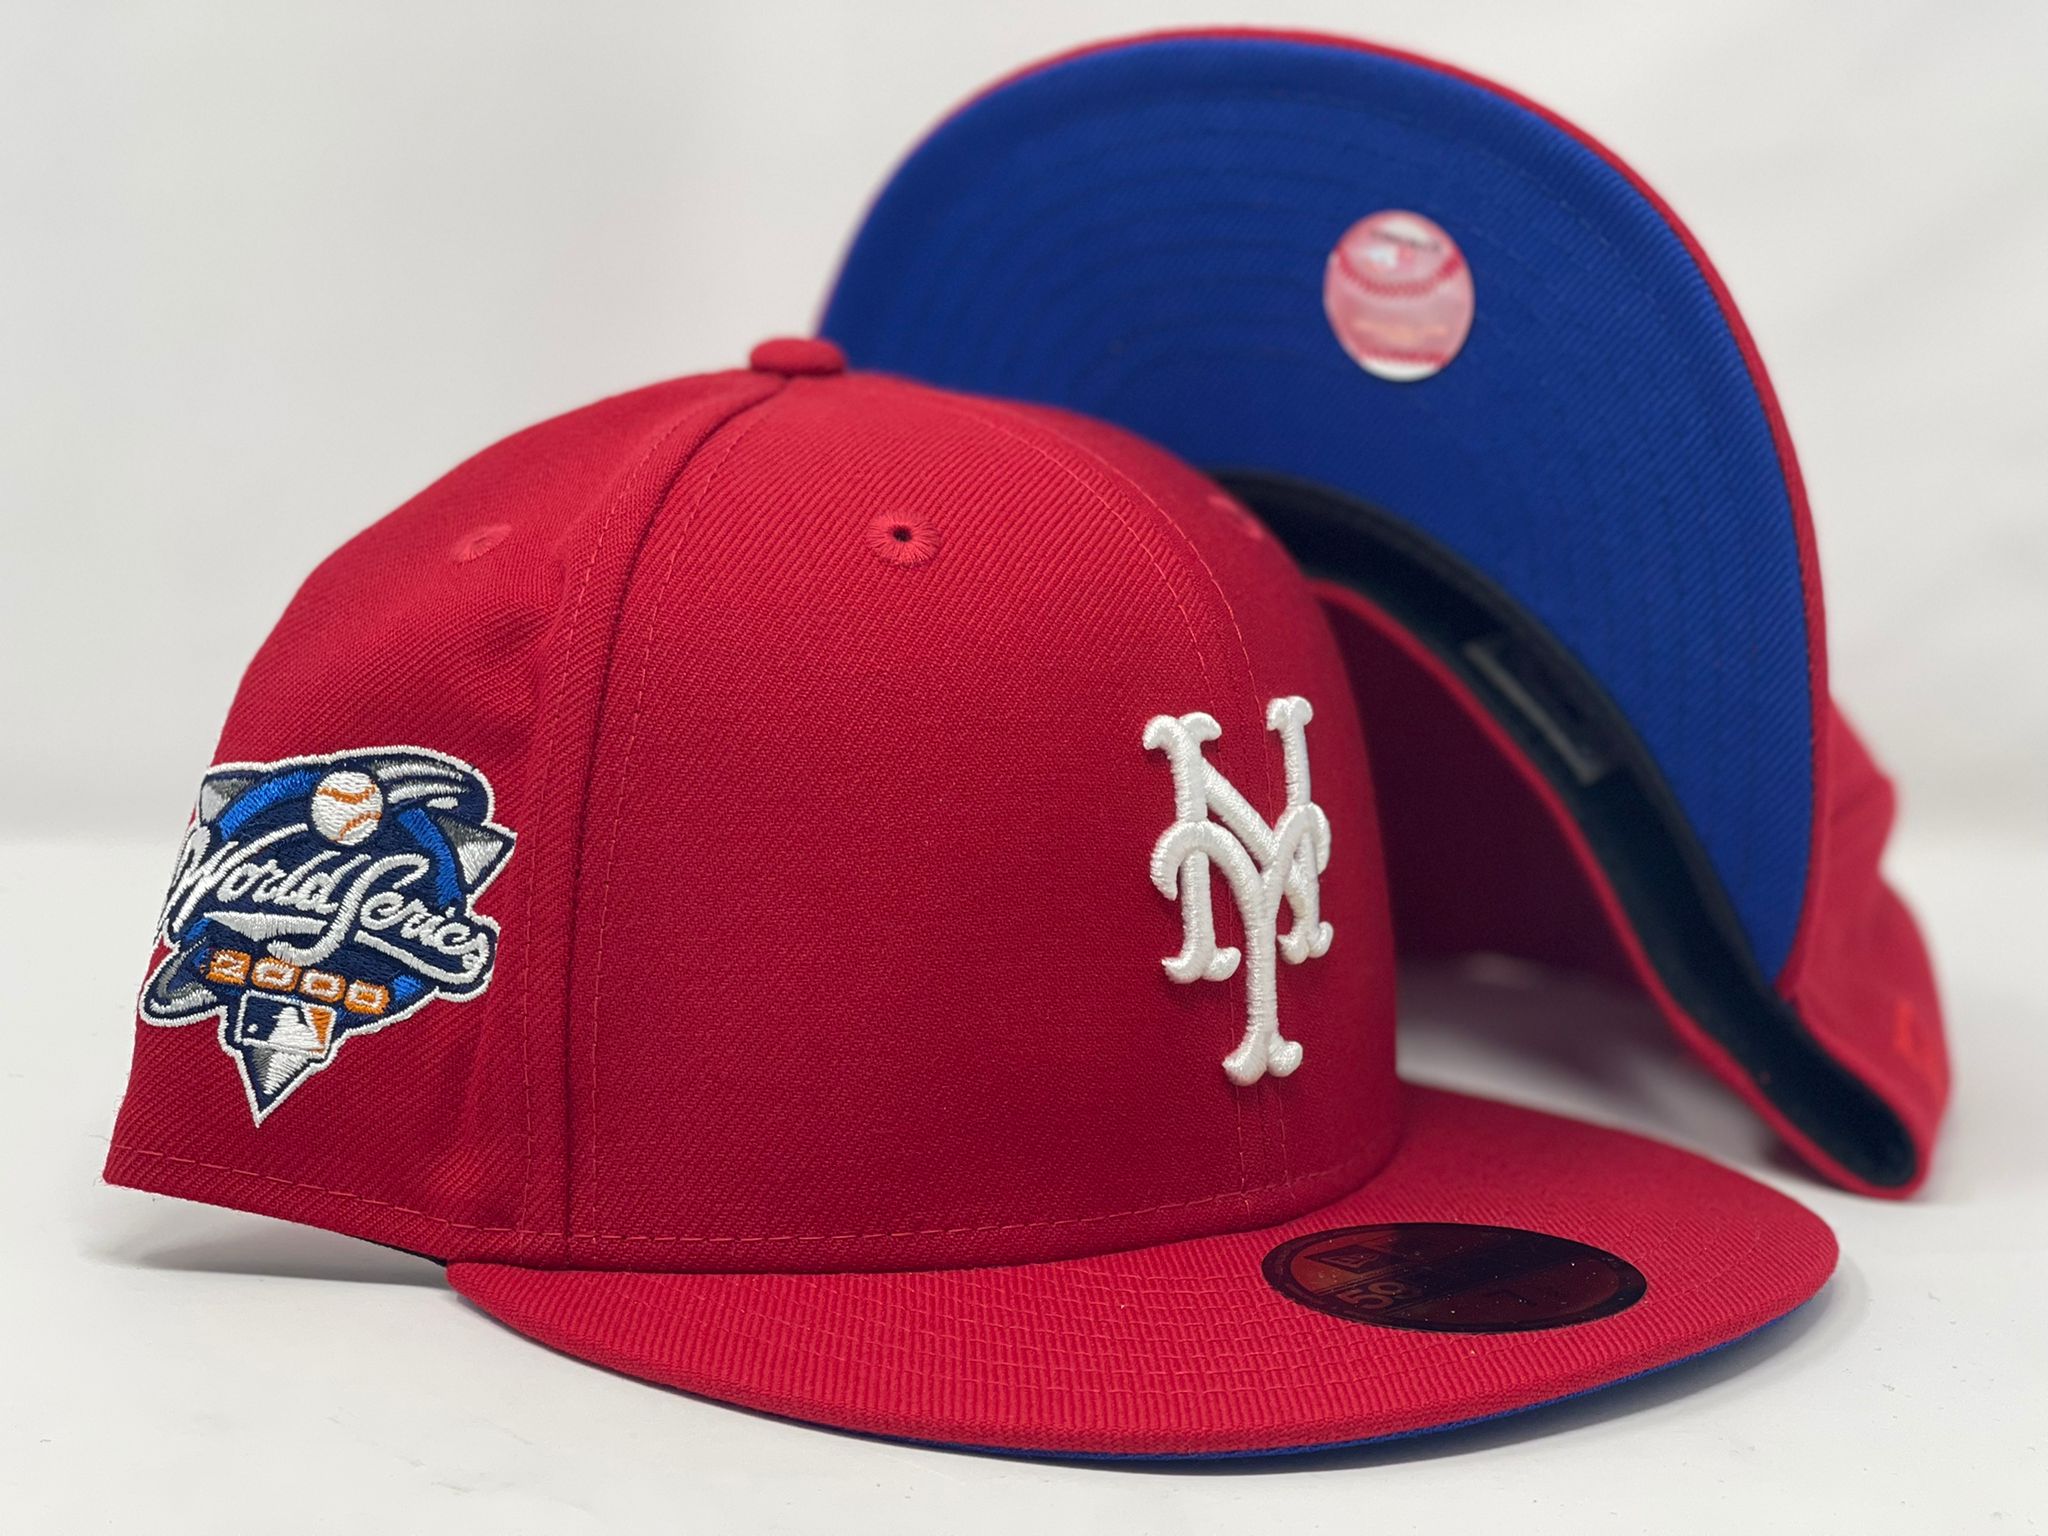 Cap of the day! @topperzstore 2000 World Series New York Mets “Red